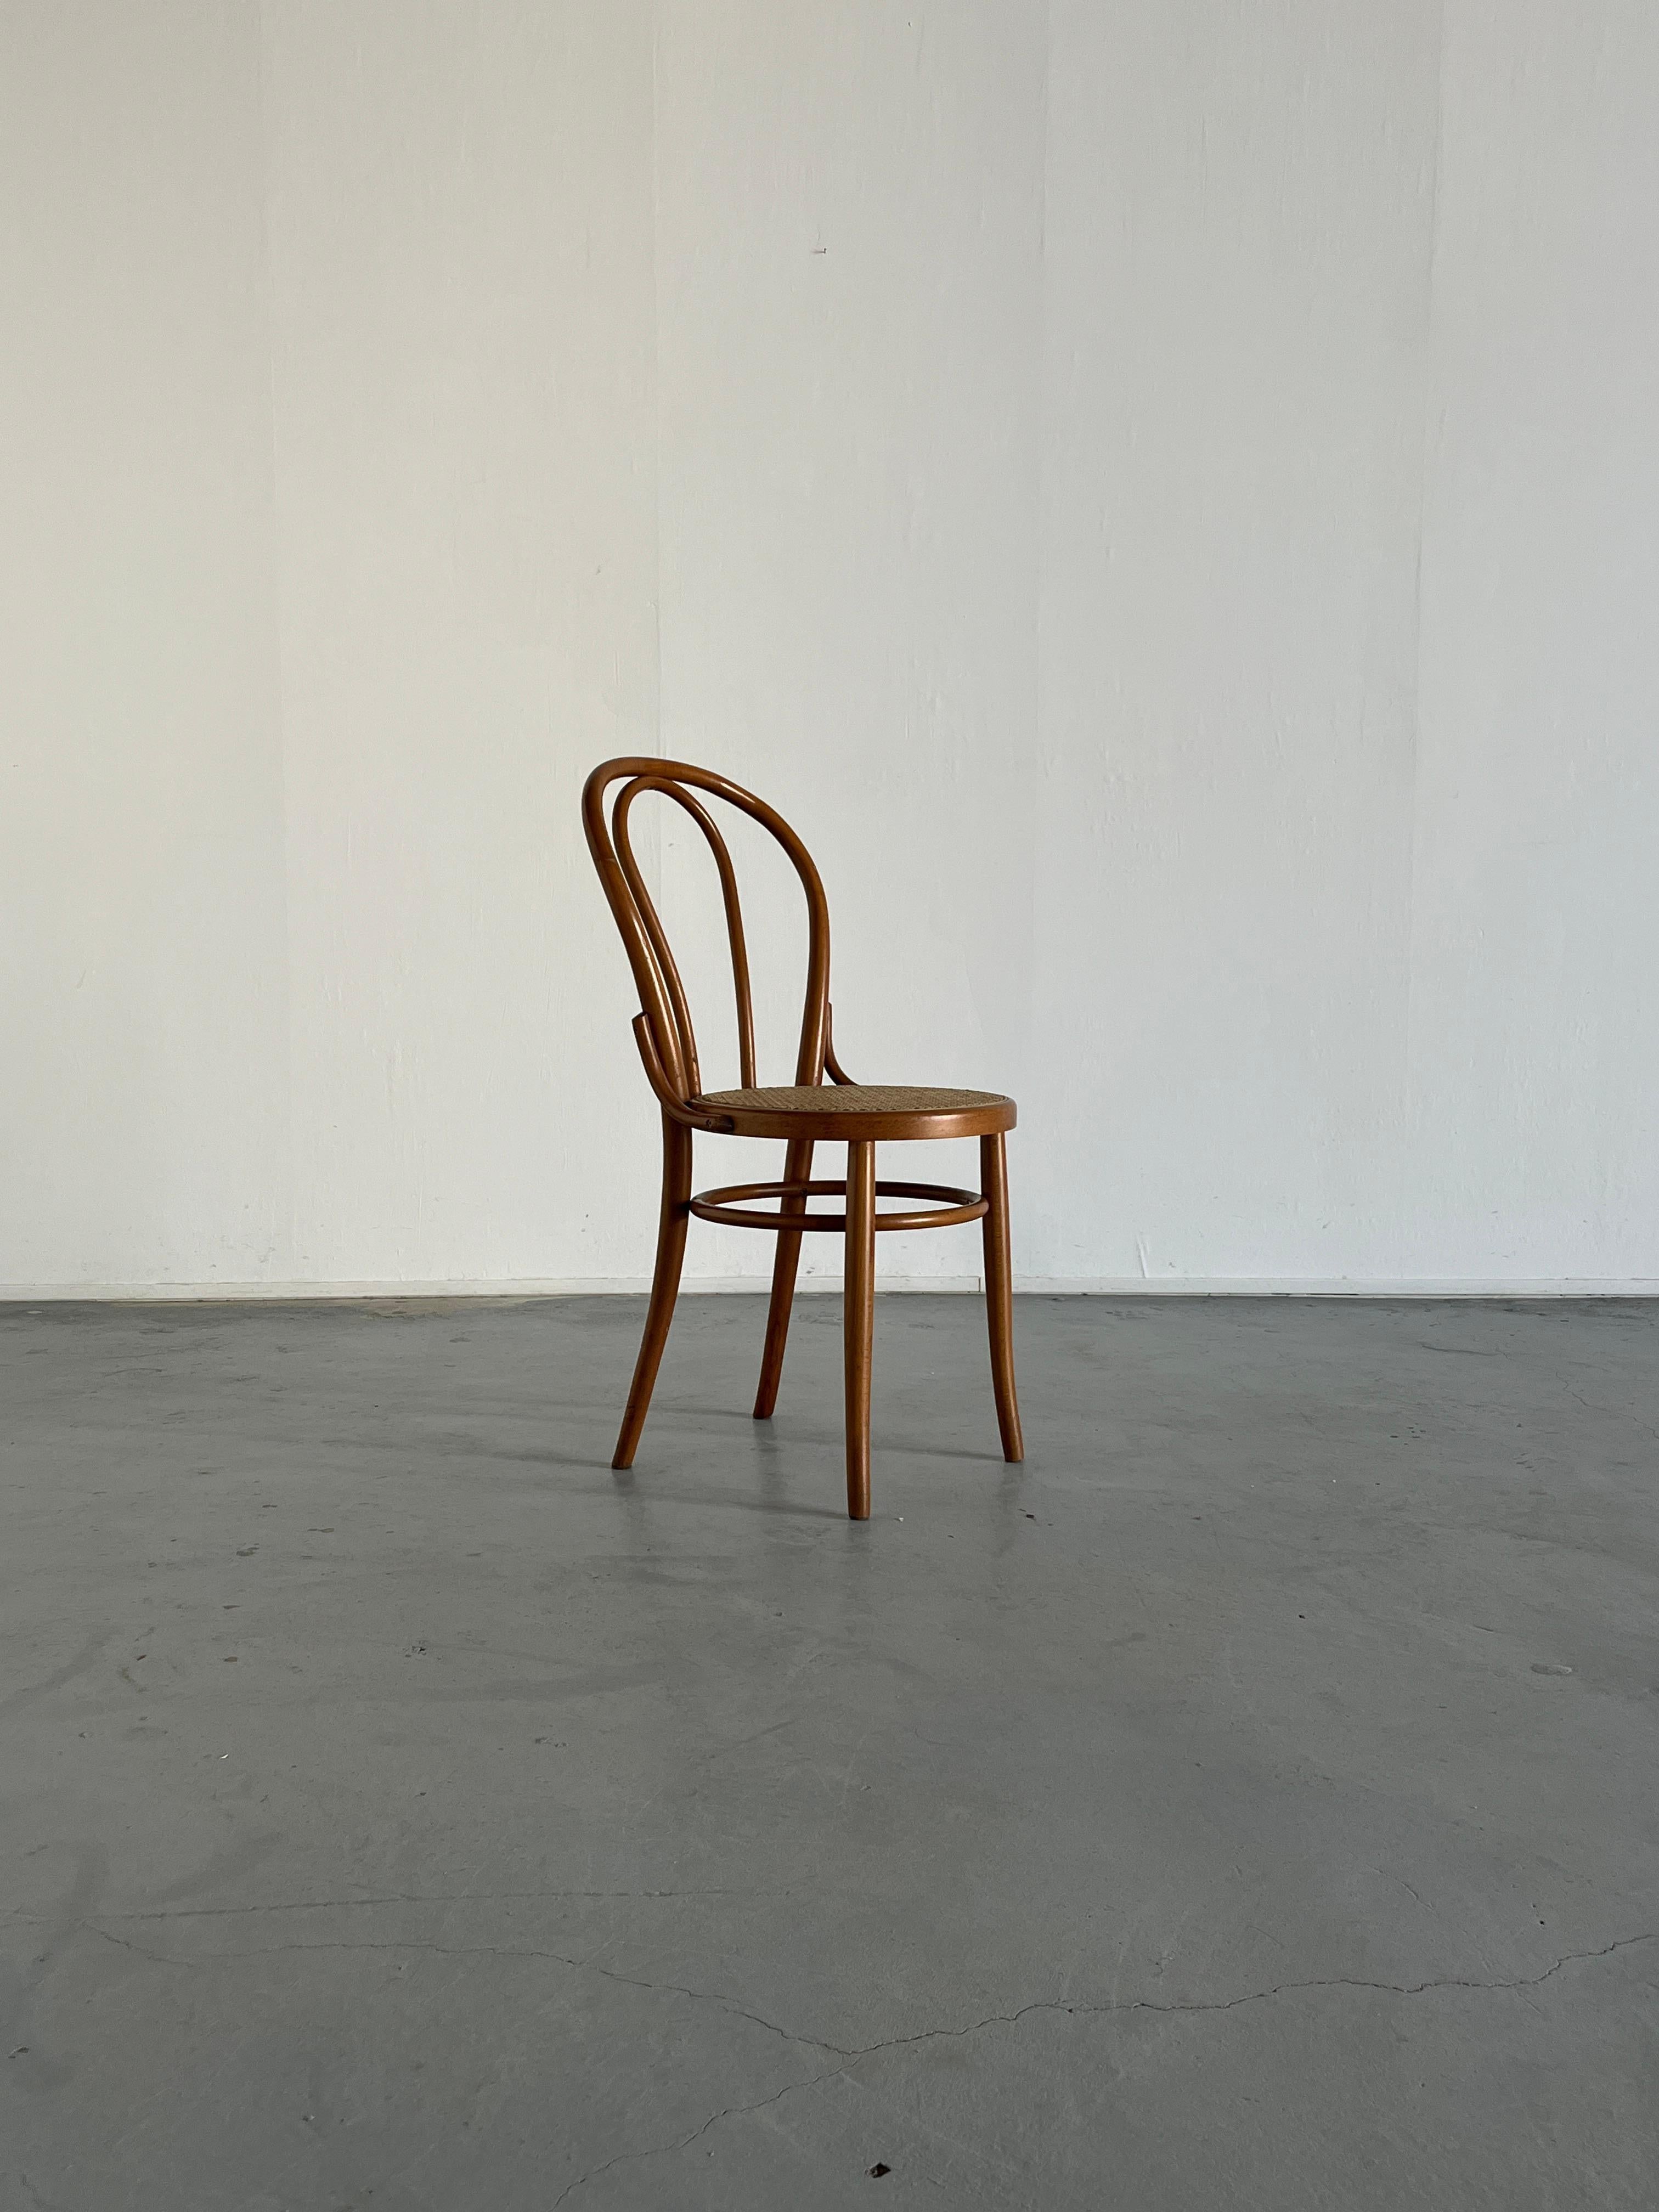 A beautiful, wooden Thonet bentwood chair, in style of the popular model no. 18.

Based on the dimensions, materials, weight and type of screw, it is most certainly an original Thonet no. 18 chair produced by the Thonet Mundus factory in former